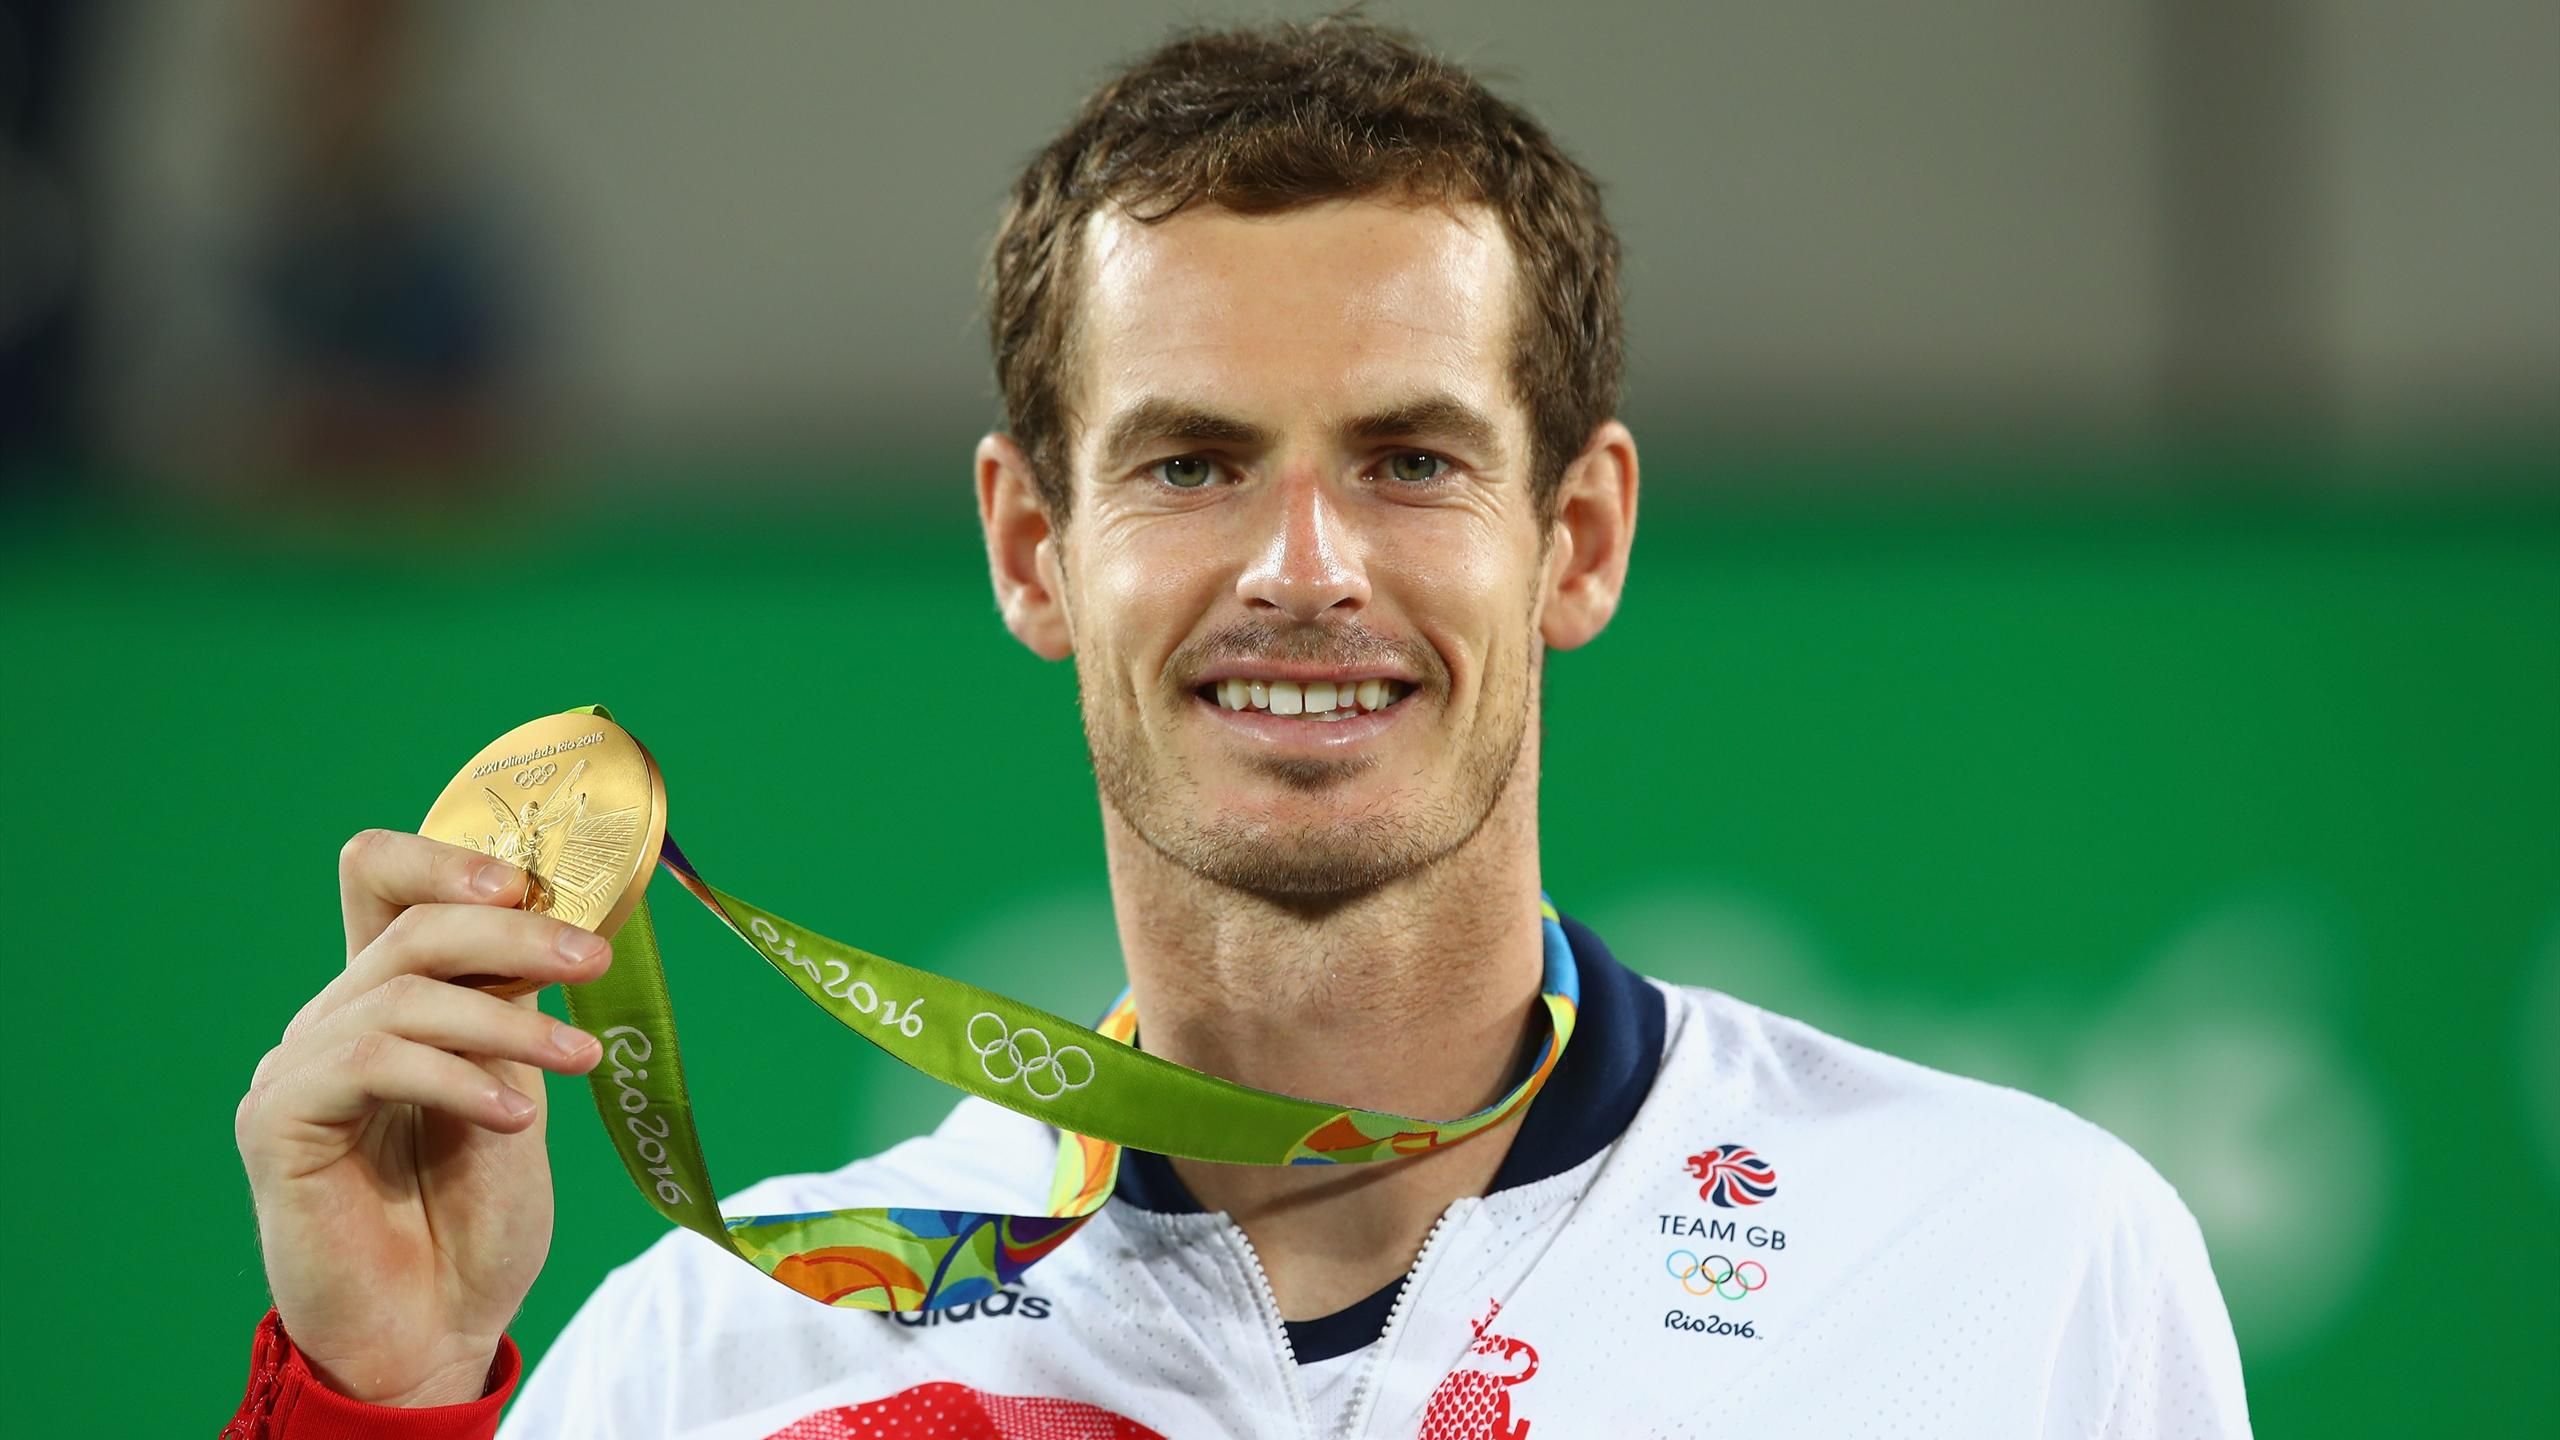 Paris 2024 Olympic Games: Andy Murray on latest ambitions to feature – ‘I would want to be there by right’